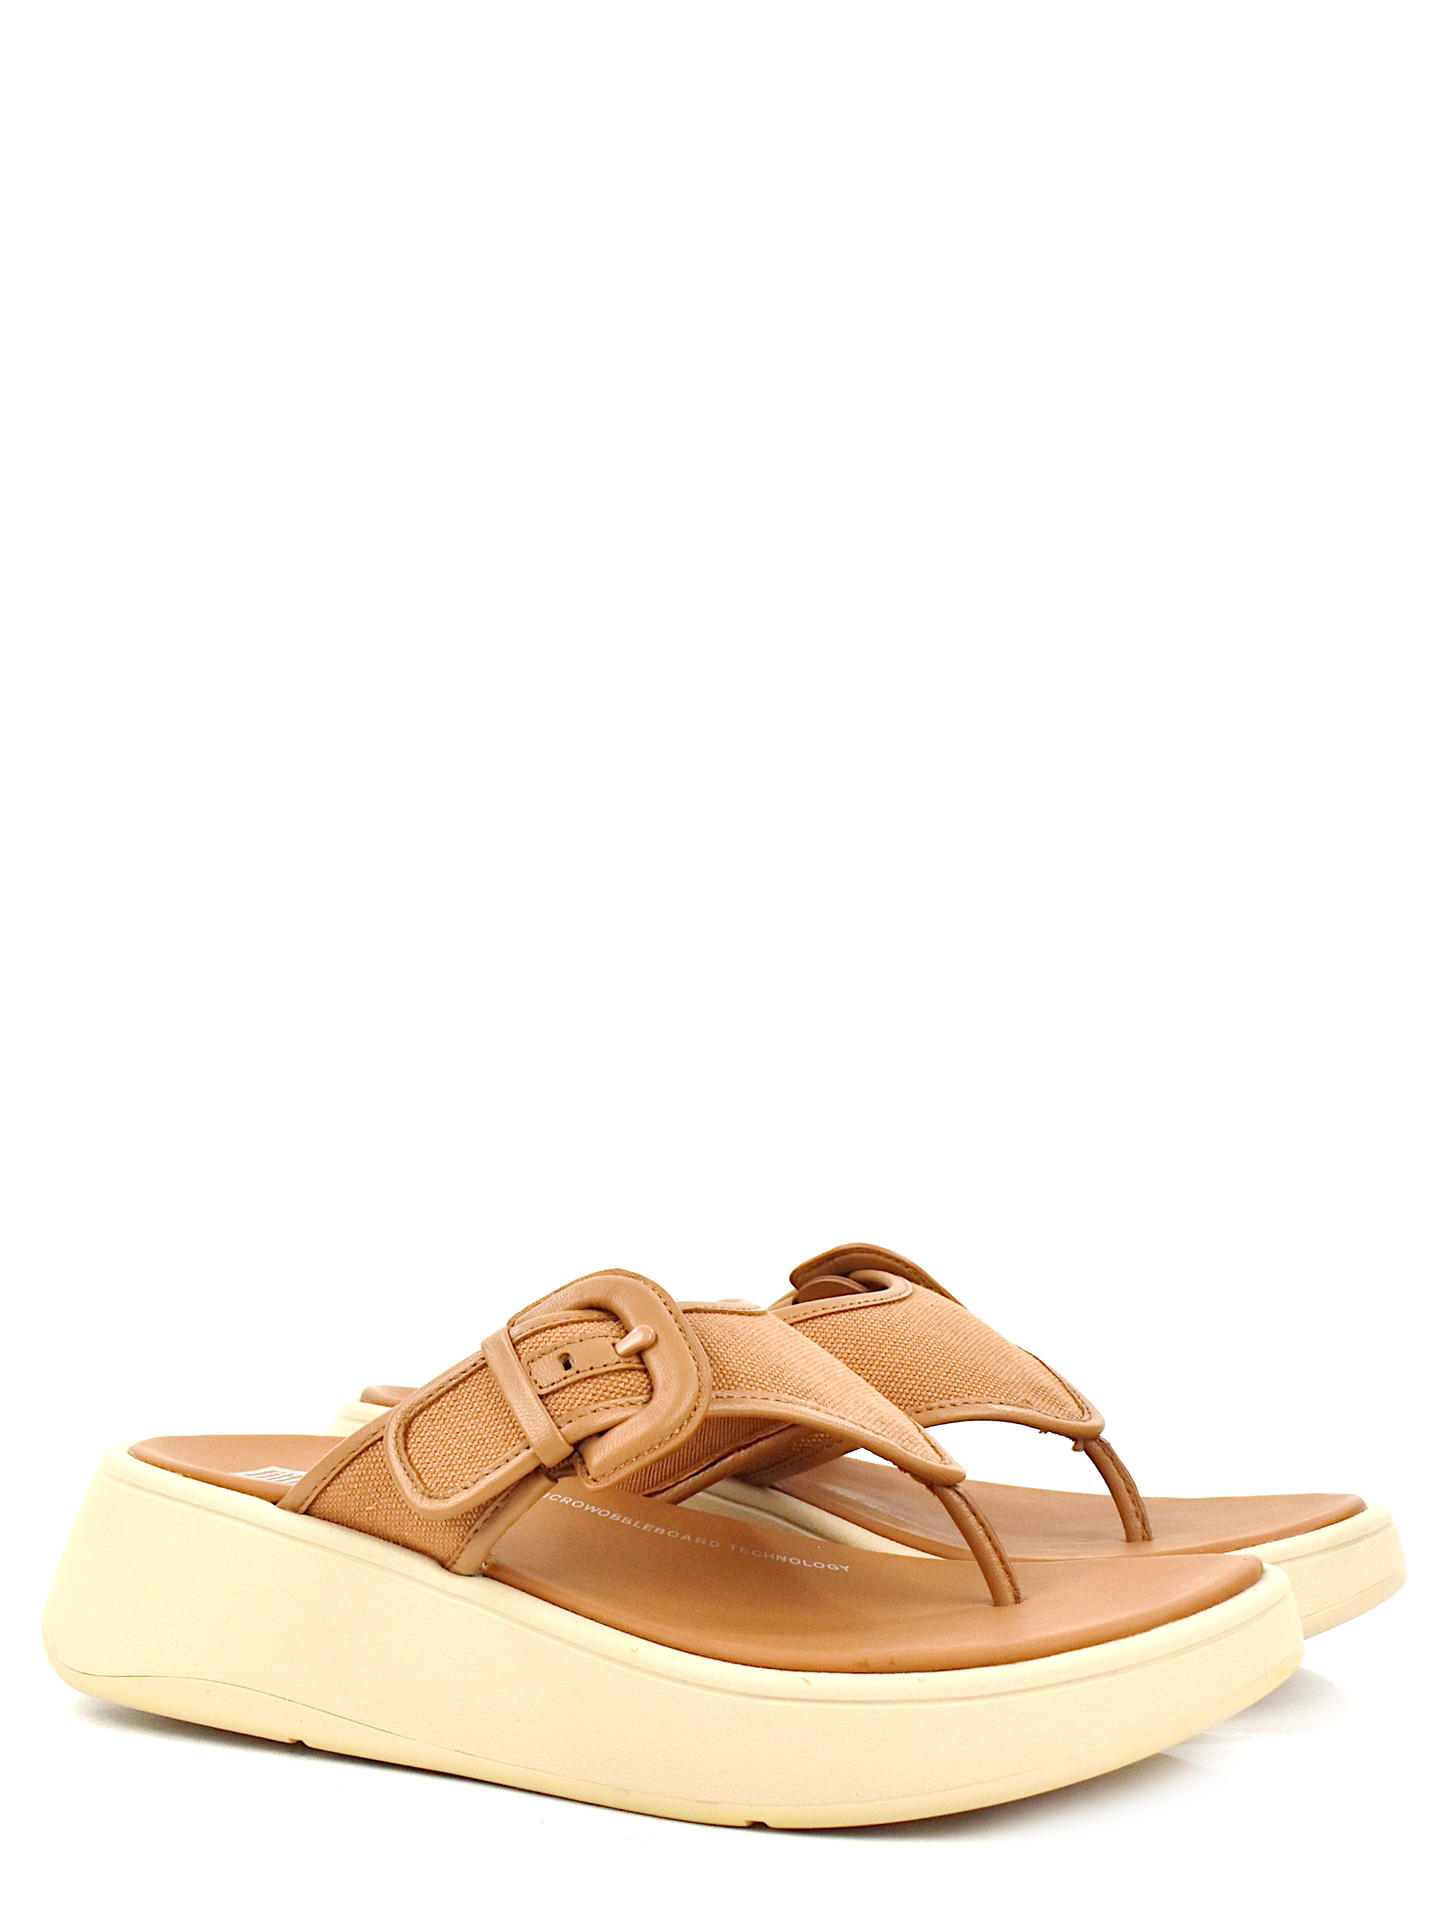 SANDALO BASSO FITFLOP FY6 CUOIO